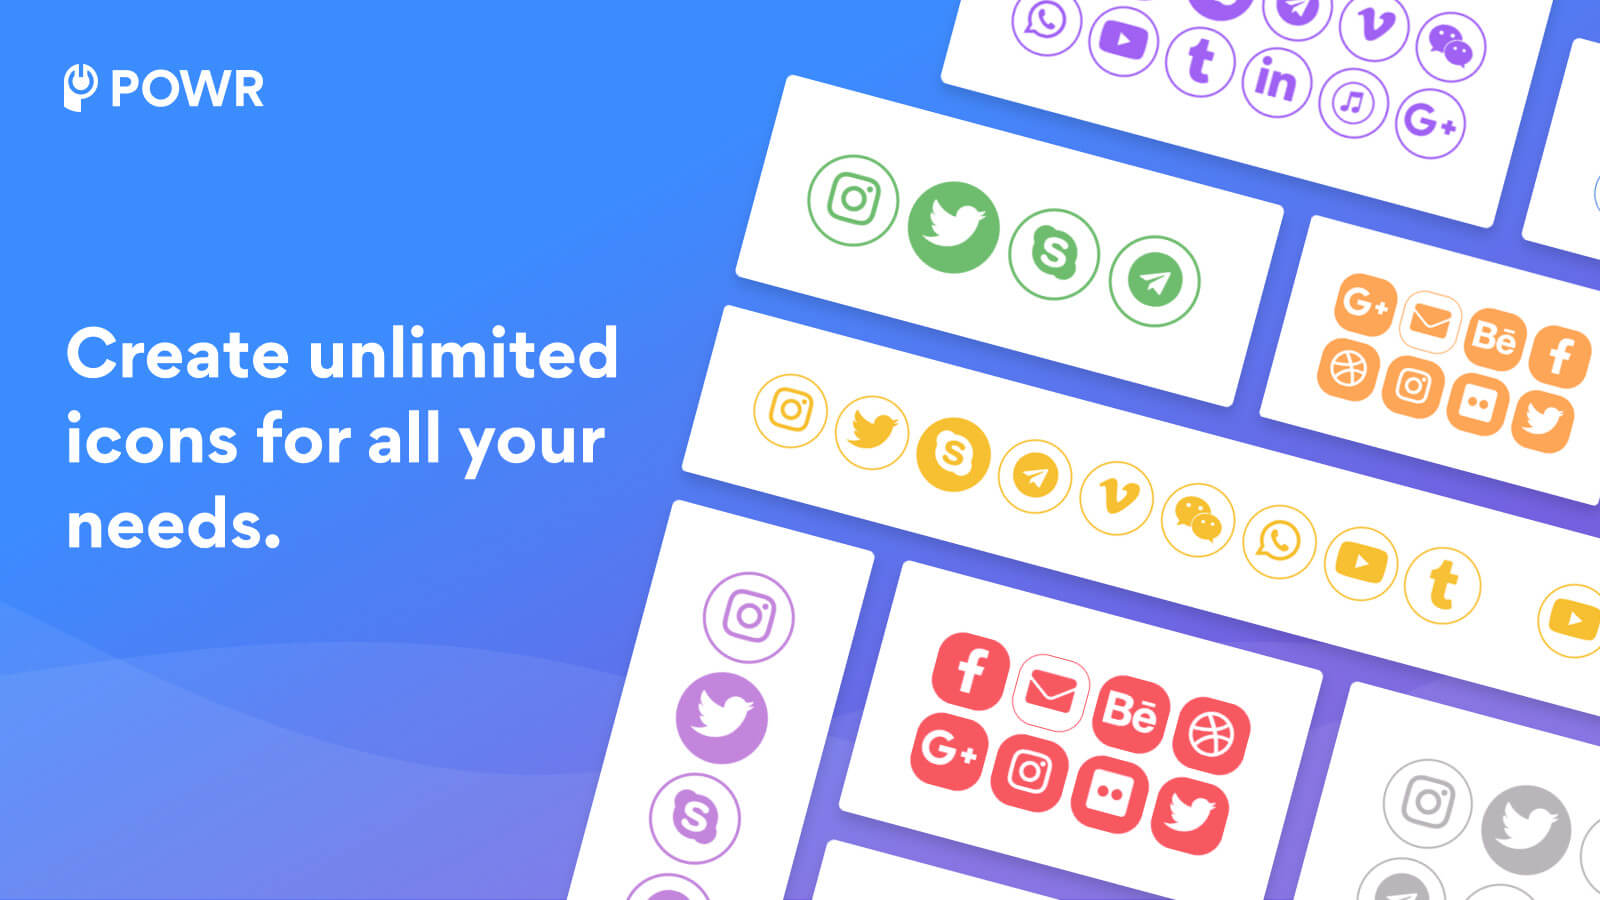 Increase your social followers simply by adding beautiful social media buttons on your site to direct your website vistors